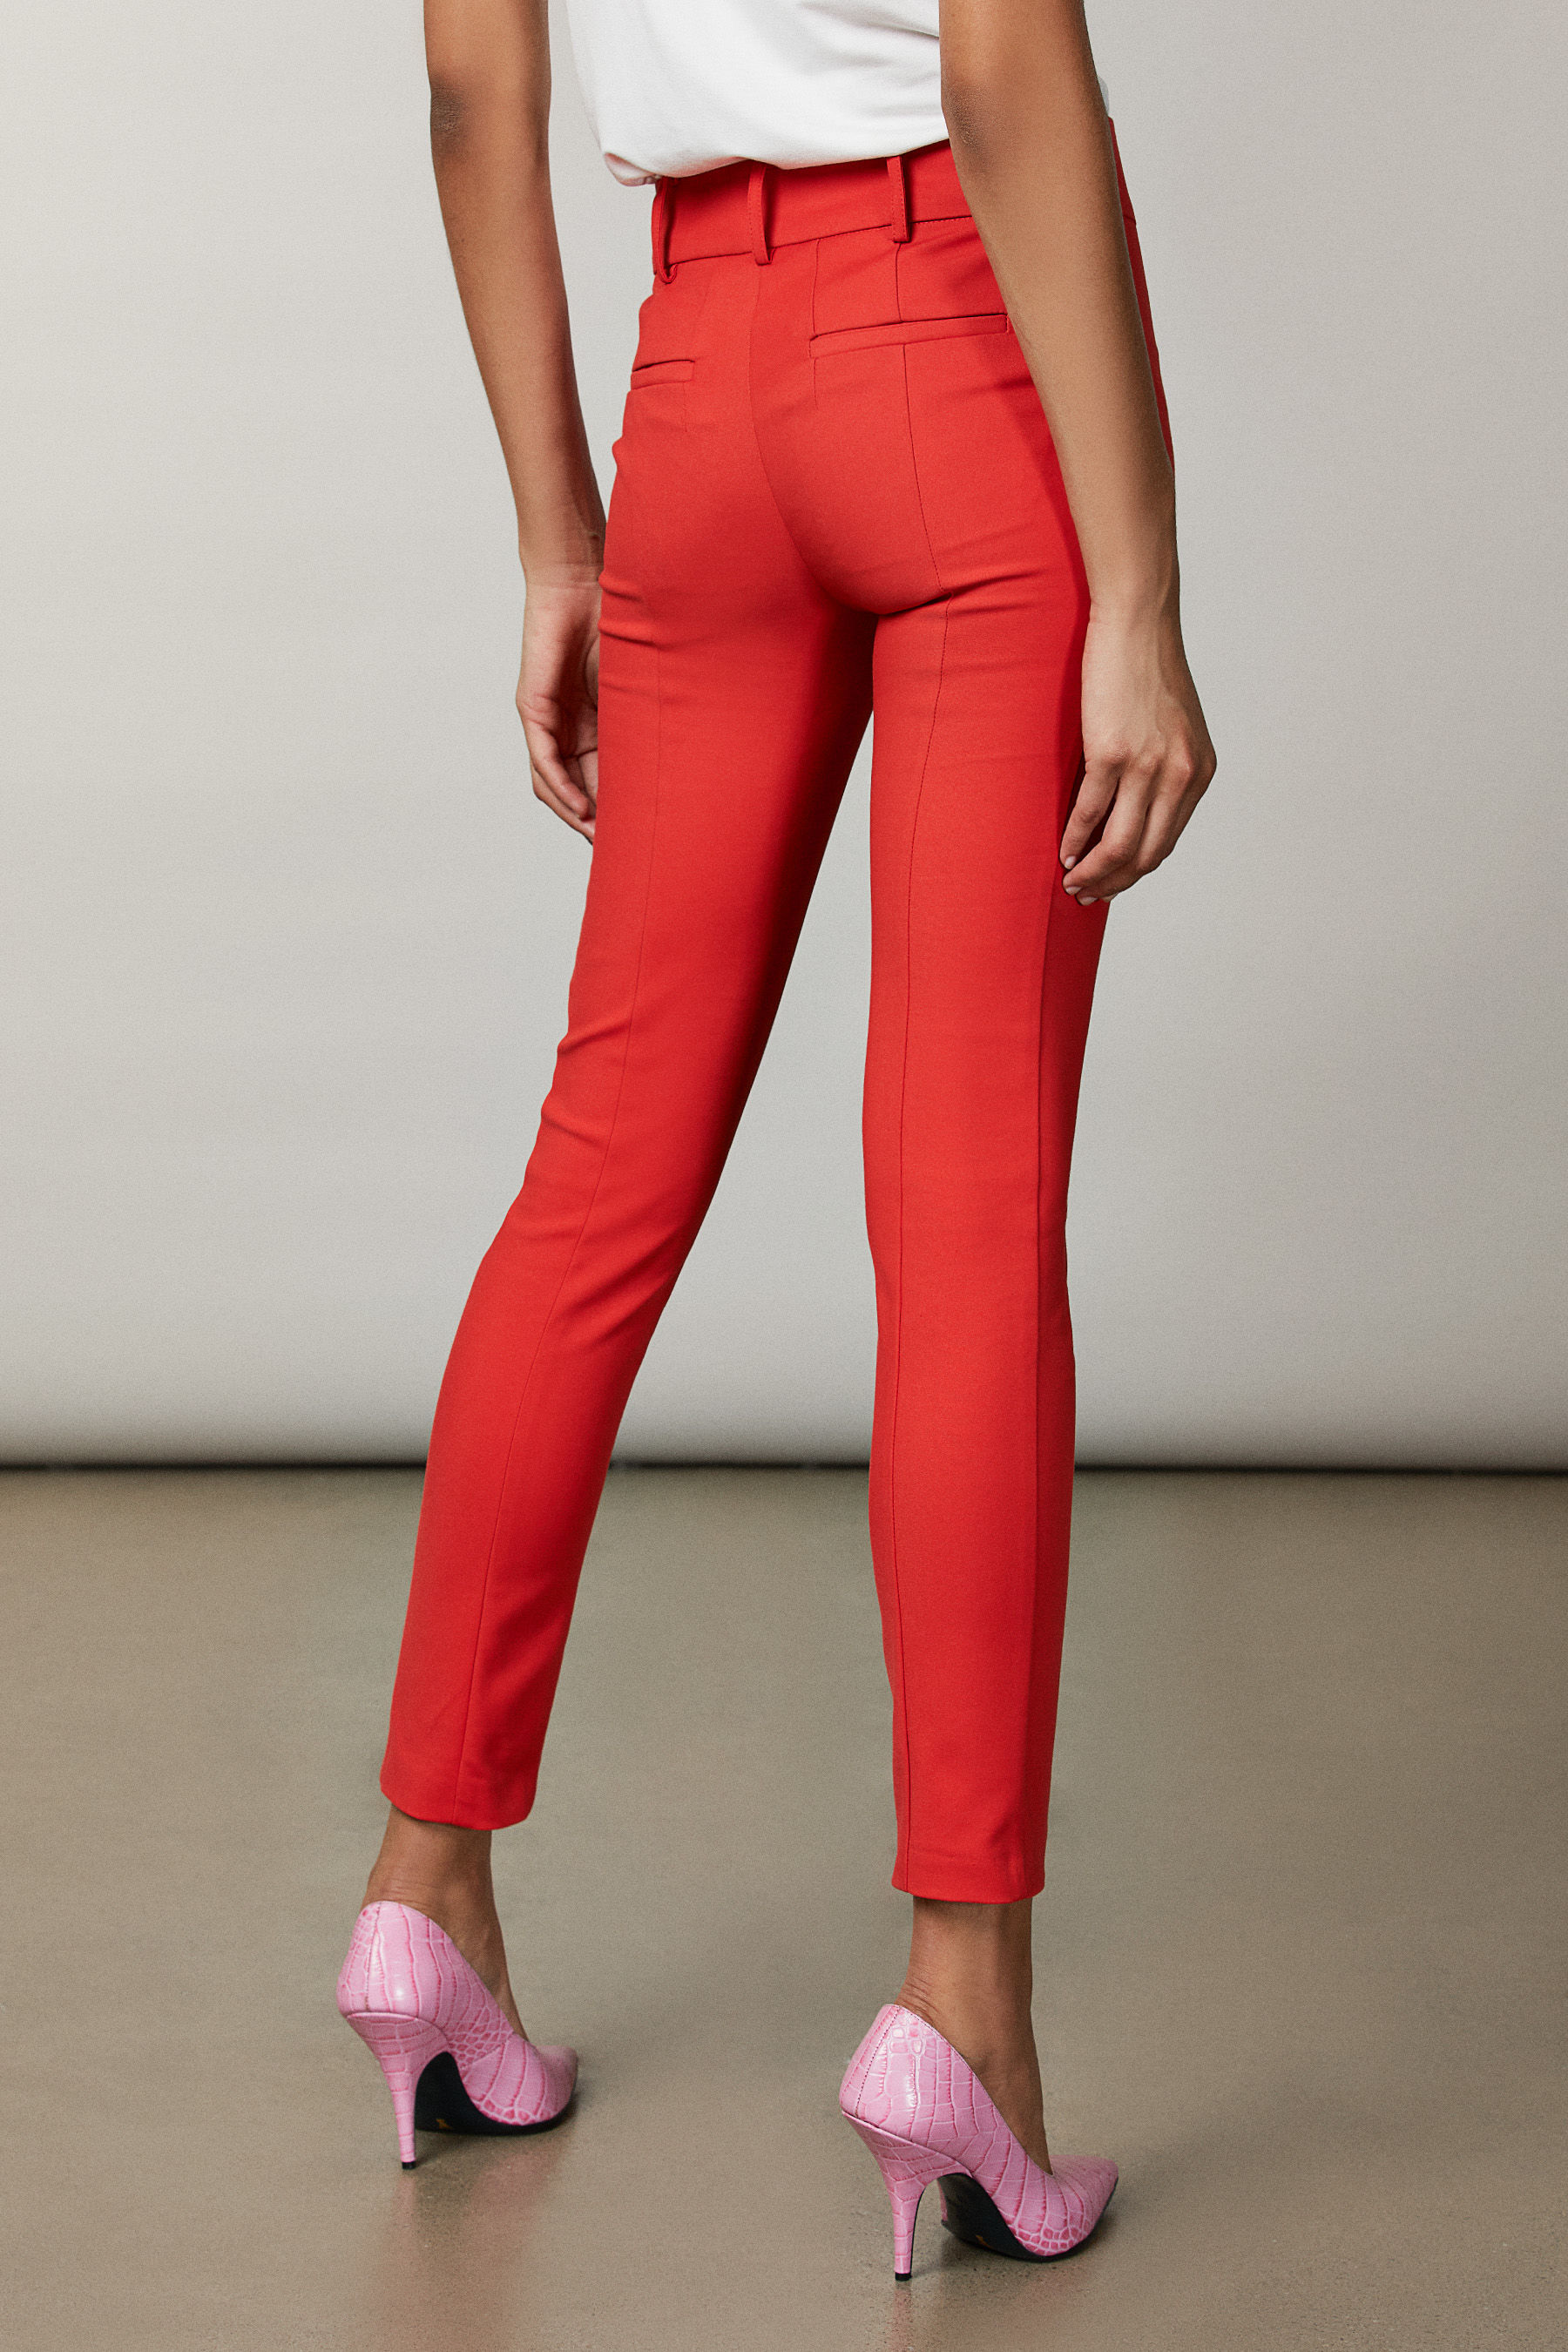 Womens Trousers Slacks and Chinos Red Slacks and Chinos Patrizia Pepe Trousers Patrizia Pepe Cotton Cropped Trousers in Orange 